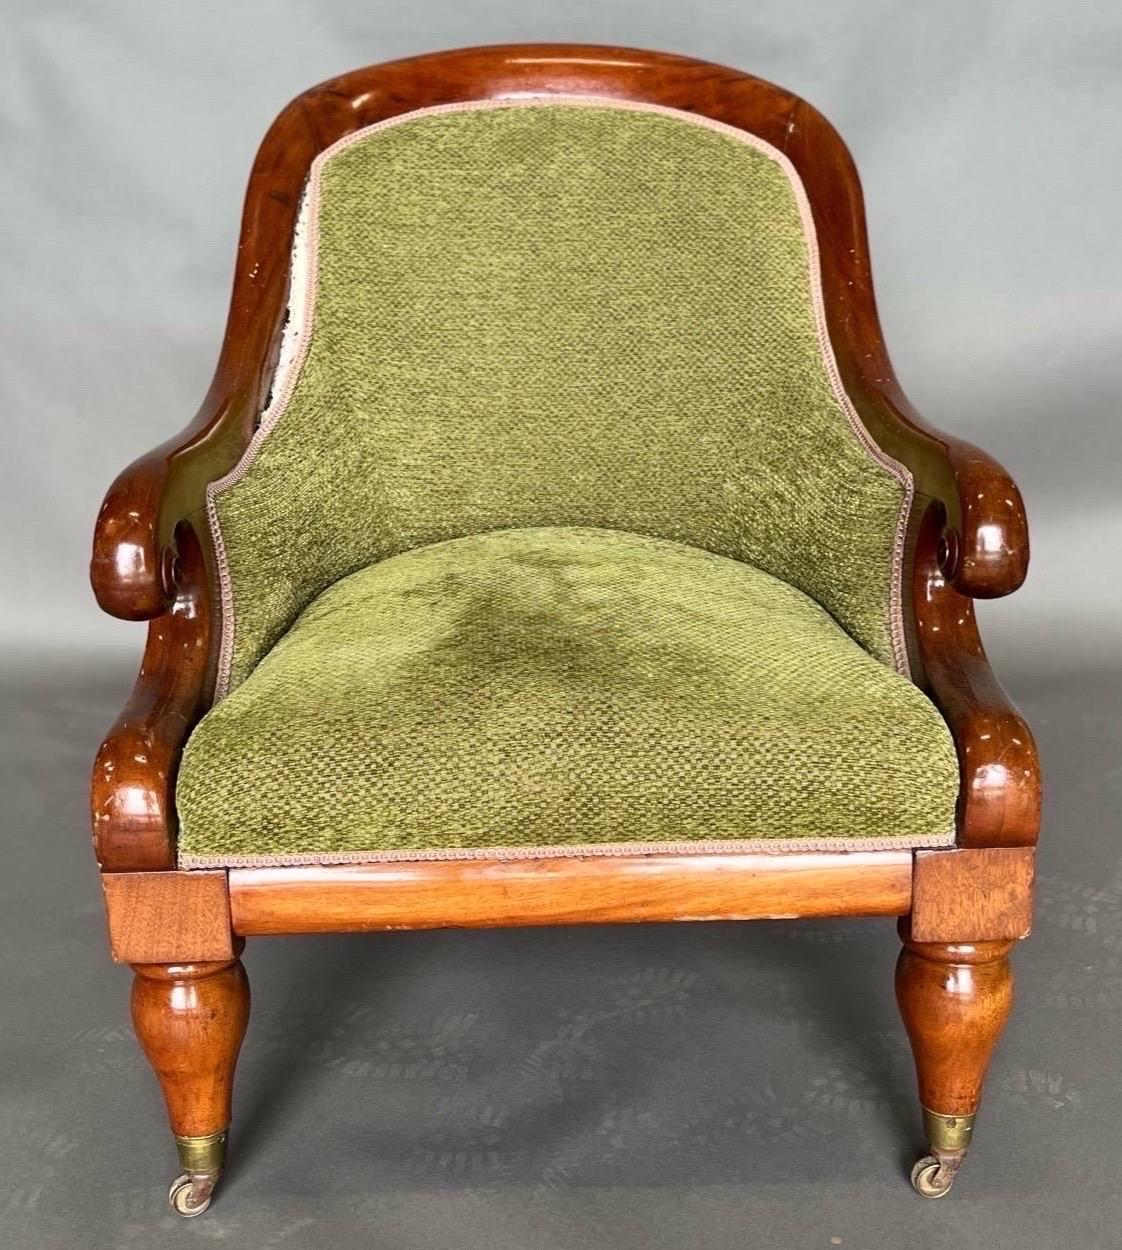 Cozy 19th century upholstered English mahogany library chair. Great color and scale. Fabric ready to use as is or could easily be reupholstered. 